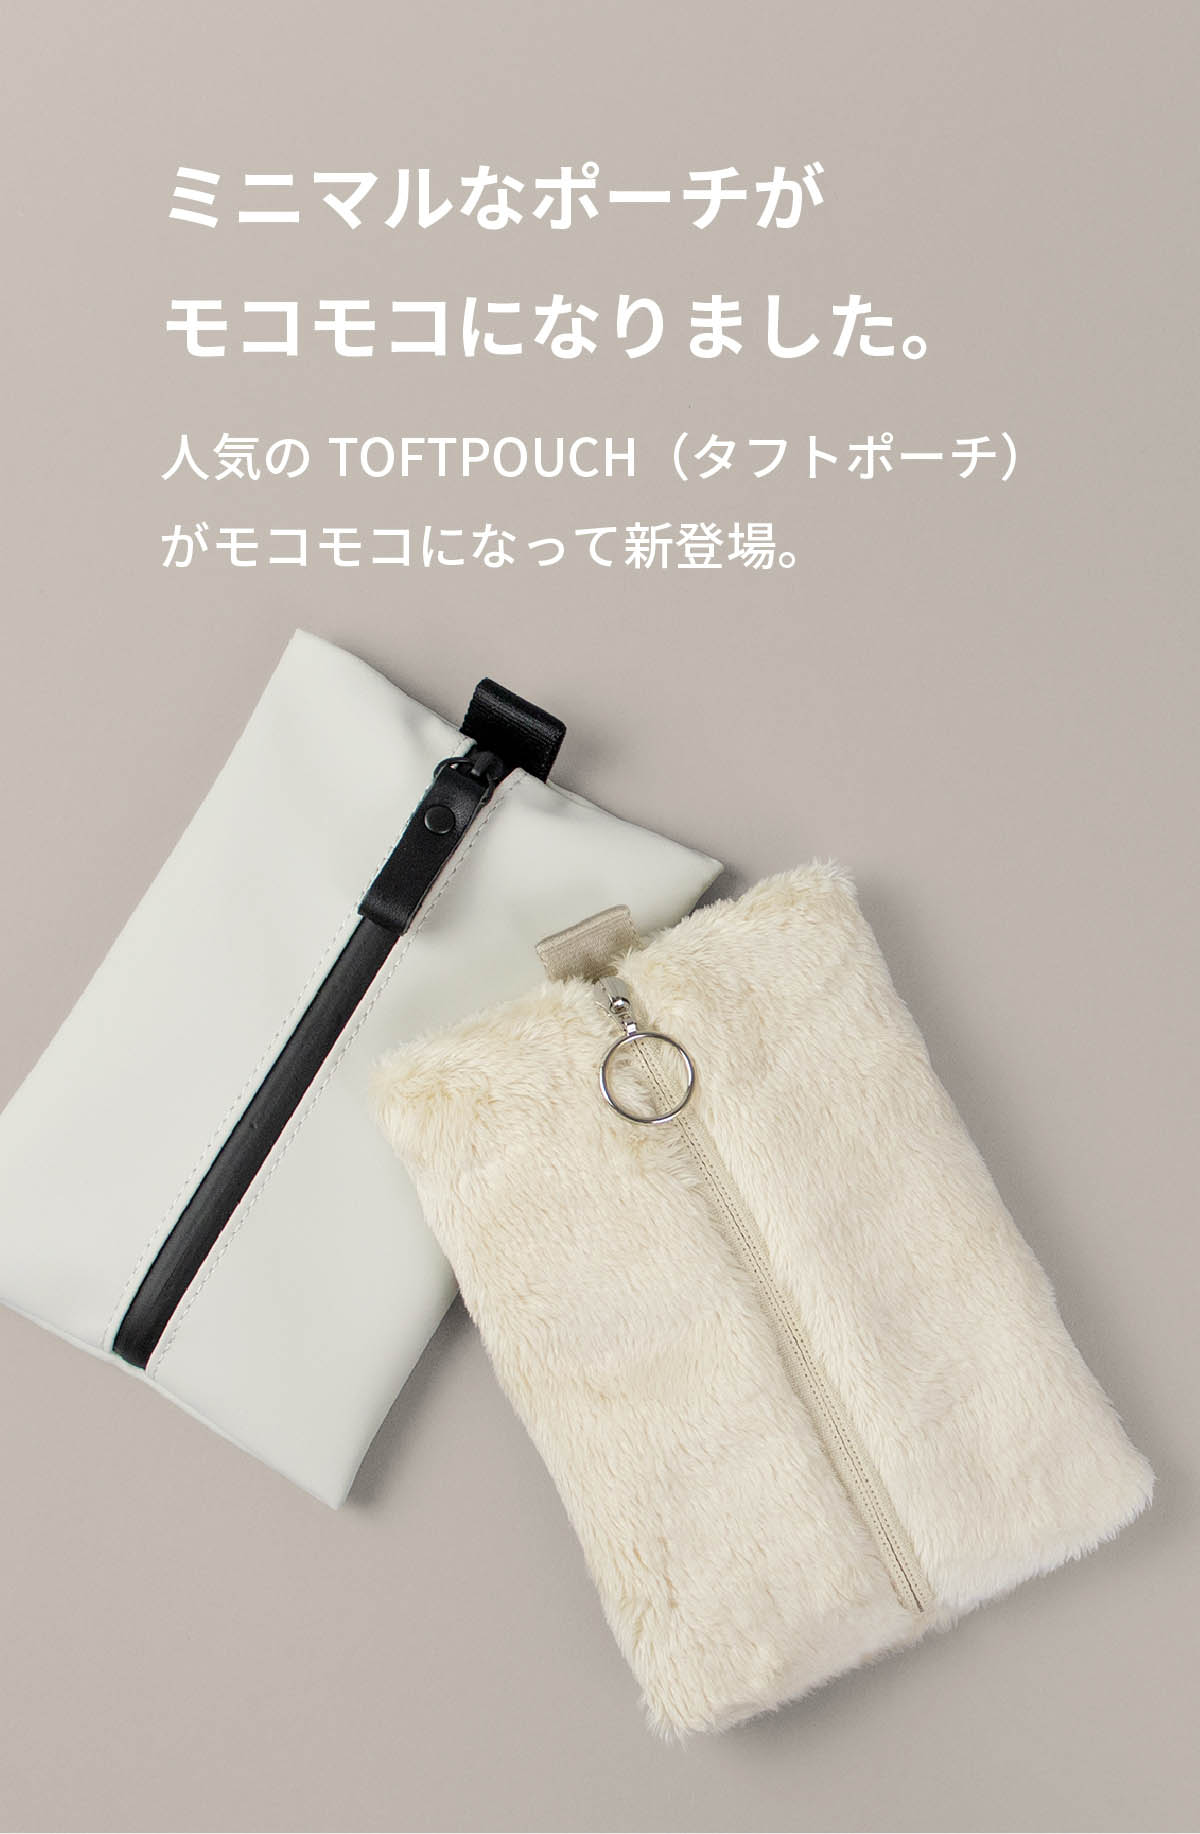 Fluff Pouch（フラッフポーチ）Sサイズ 化粧品 コスメポーチ メンズ 小物 ガジェット 送料無料 新生活 ギフト プレゼント プチギフト｜asoboze｜04